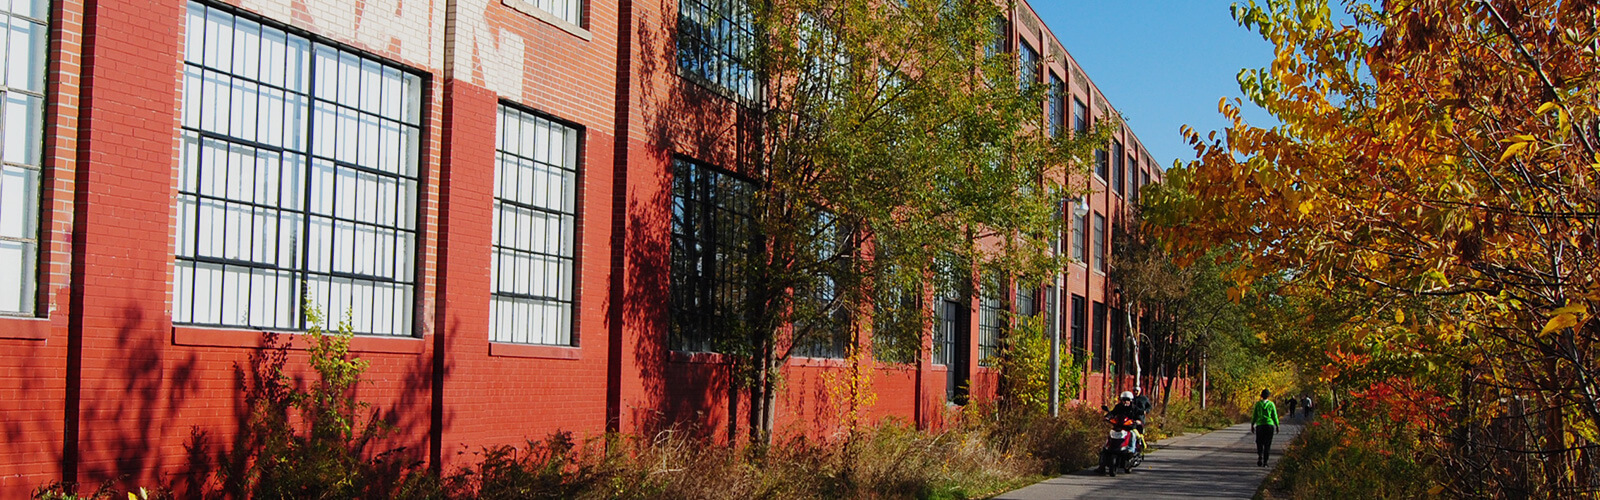 Paved trail runs along the side of a 3-storey industrial building. Bushes and other greenery line the other side of the trail. People can be seen walking along the path.